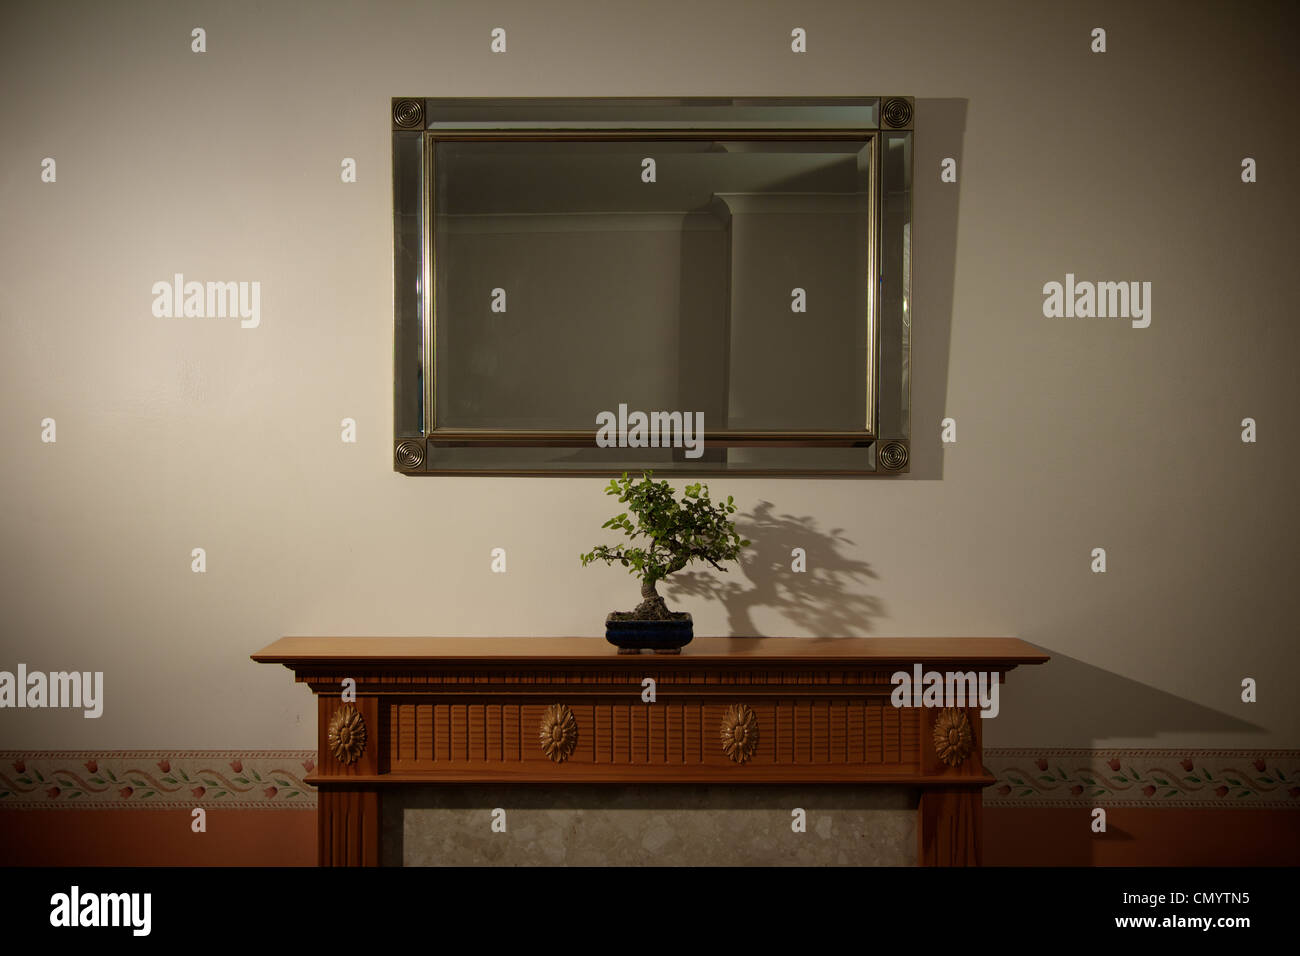 A lone Bonsai Tree on an empty mantel with large mirror. Stock Photo